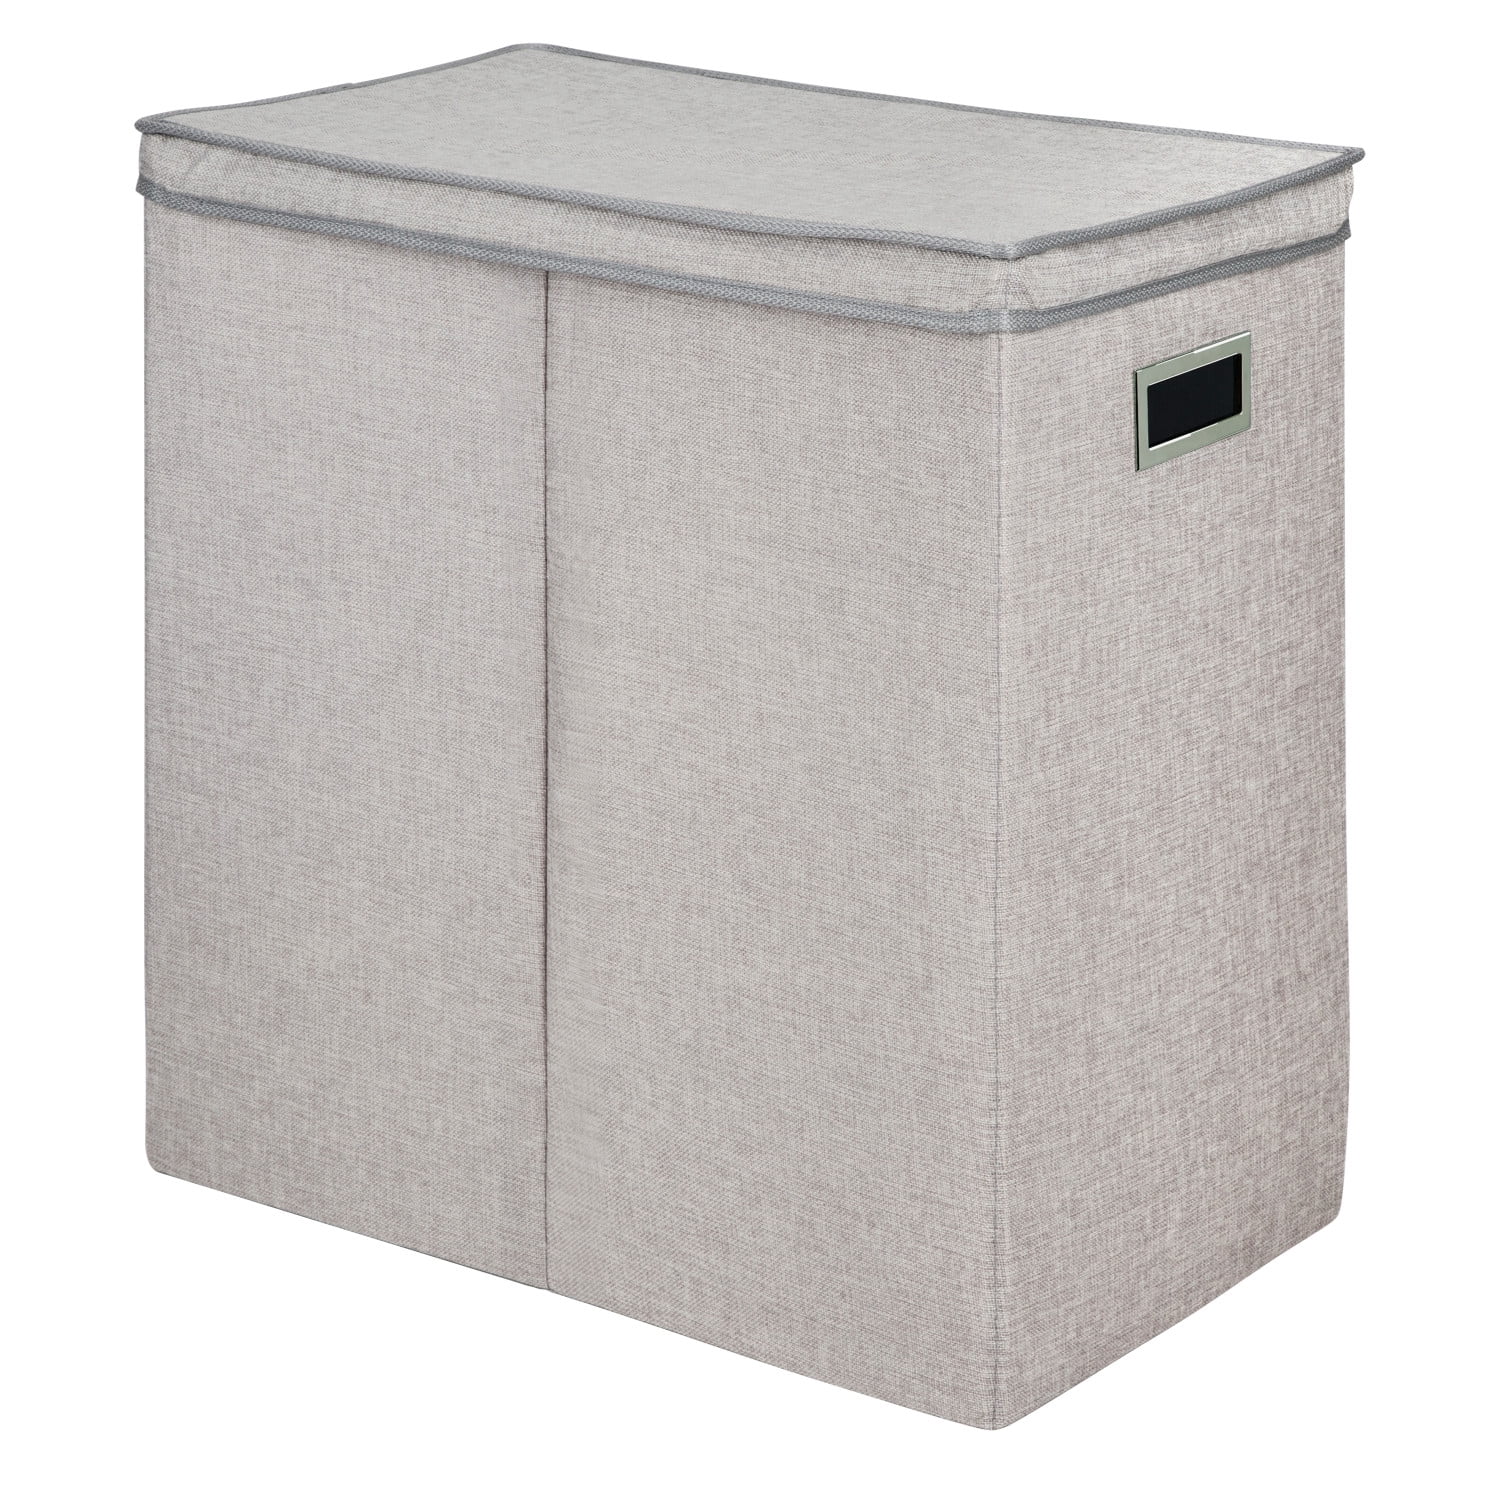 Double Sorter Laundry Hamper Collapsible Portable Lightweight Folds Flat Gray 